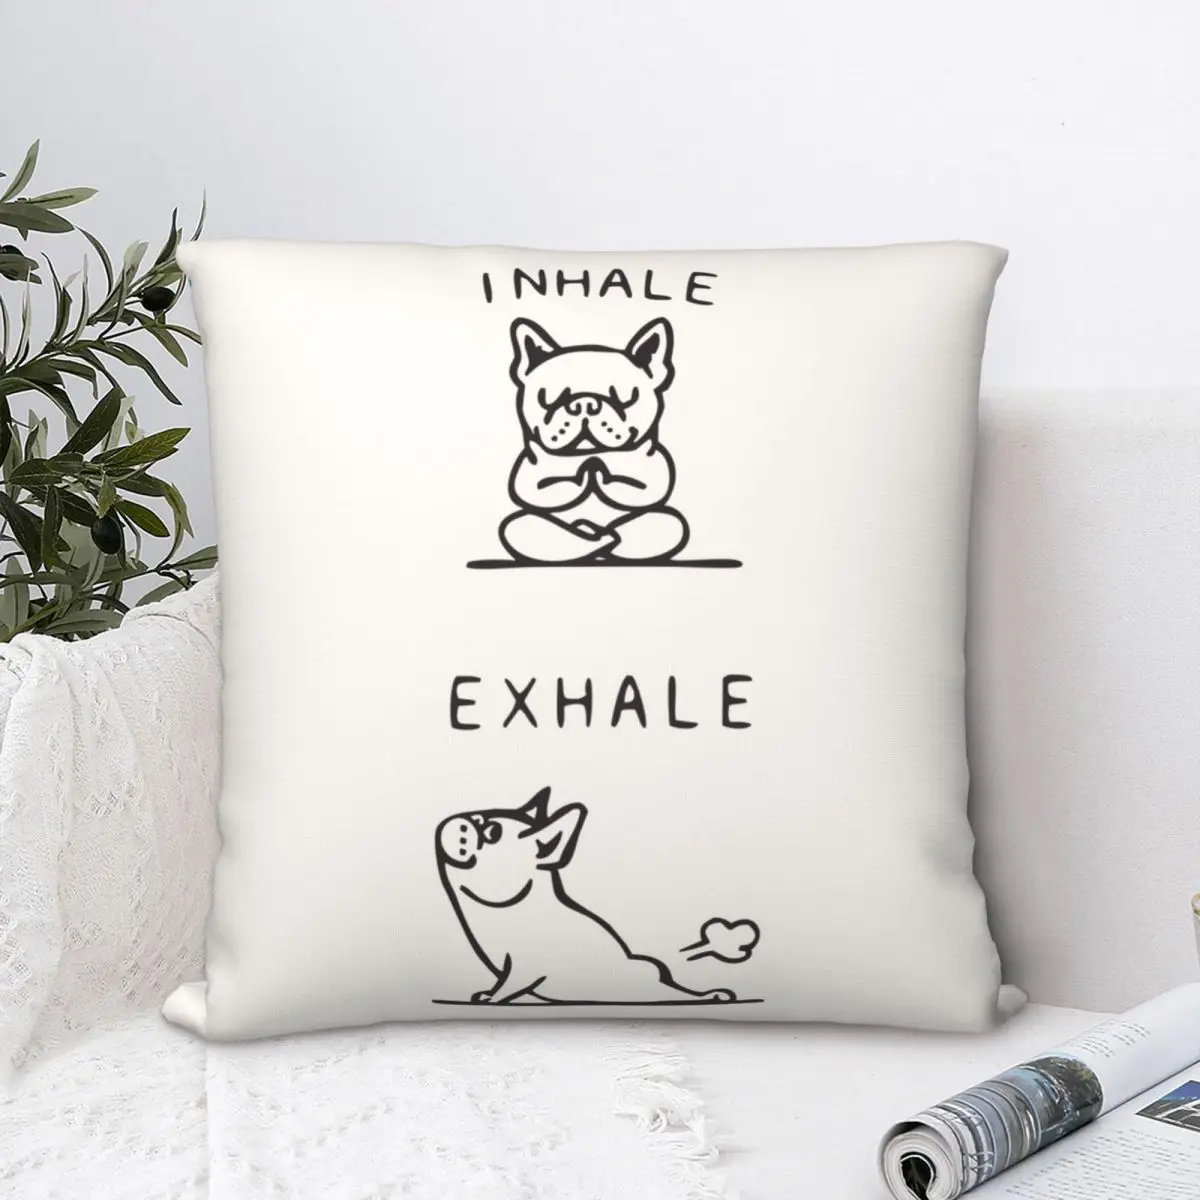 

Inhale Exhale Frenchie Square Pillowcase Cushion Cover funny Zipper Home Decorative Polyester Throw Pillow Case for Sofa Seater